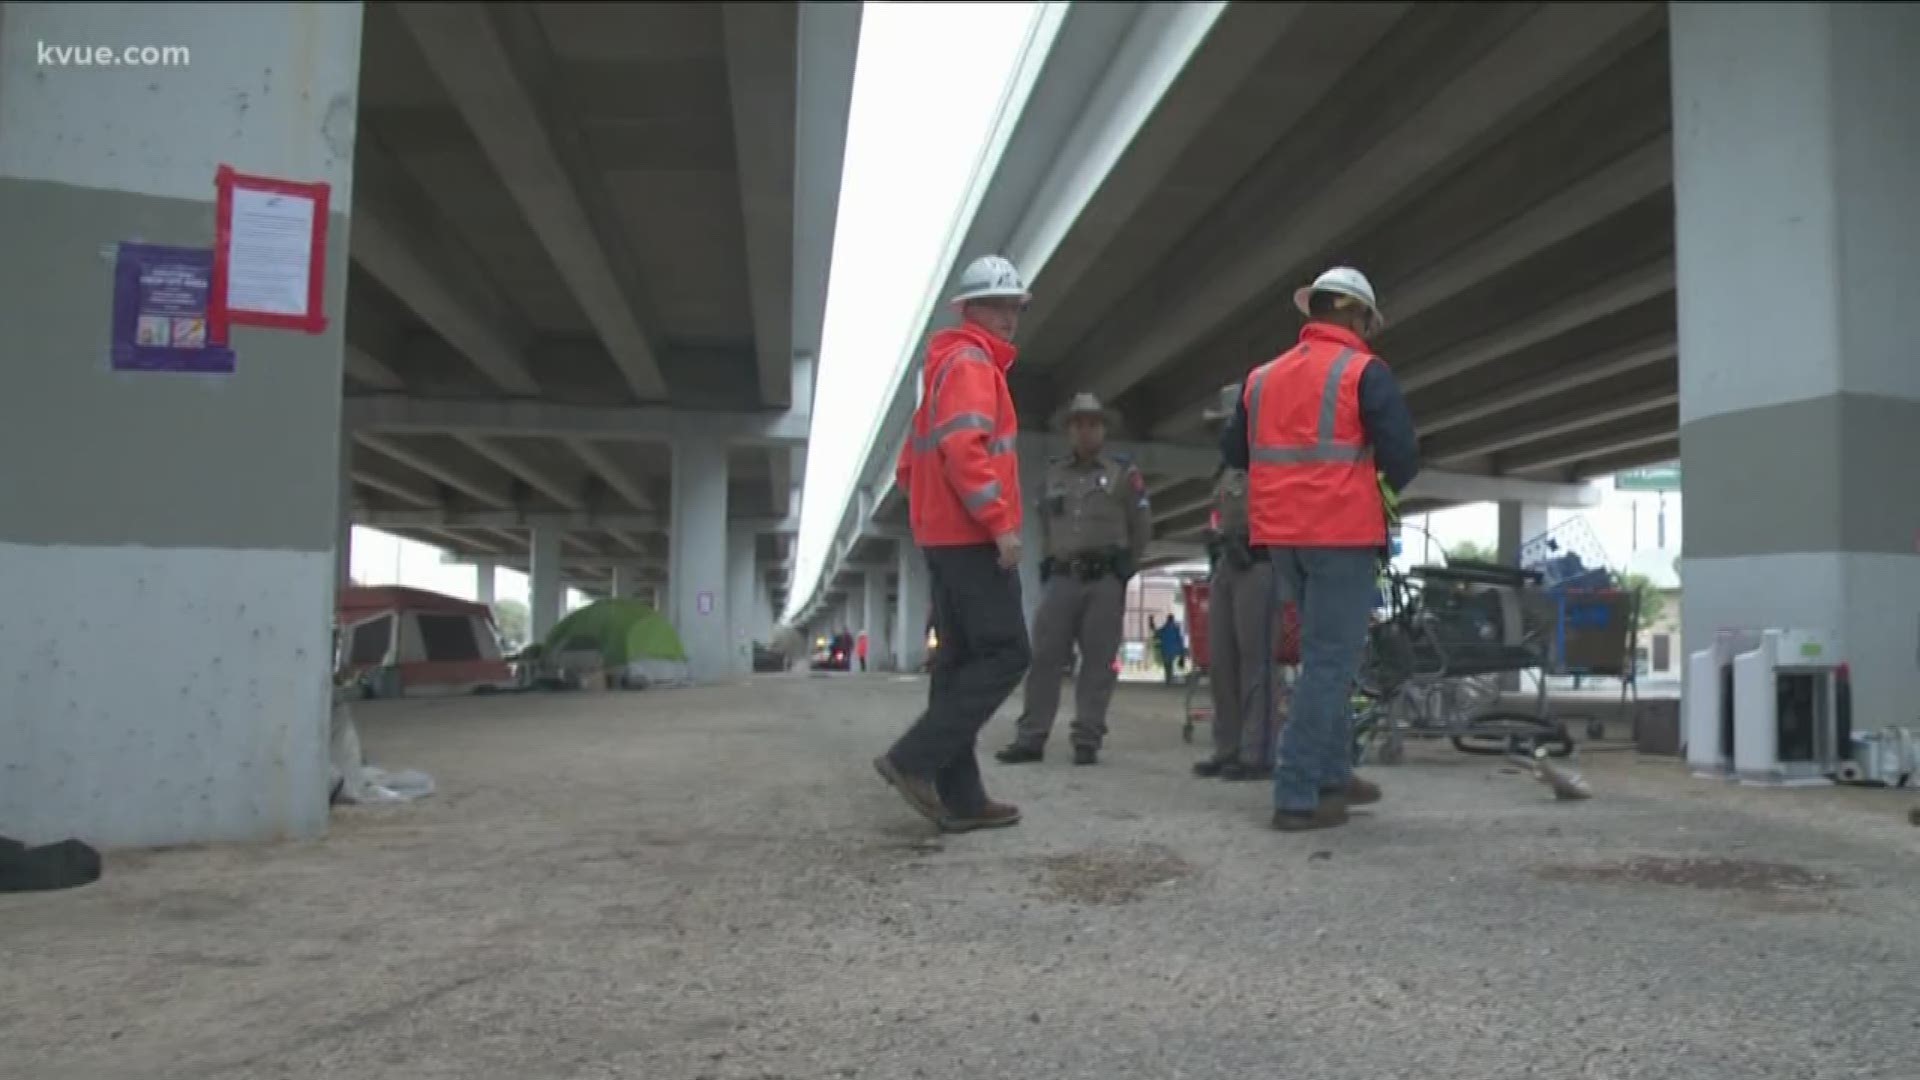 The governor today updated his plan to clean up under overpasses.